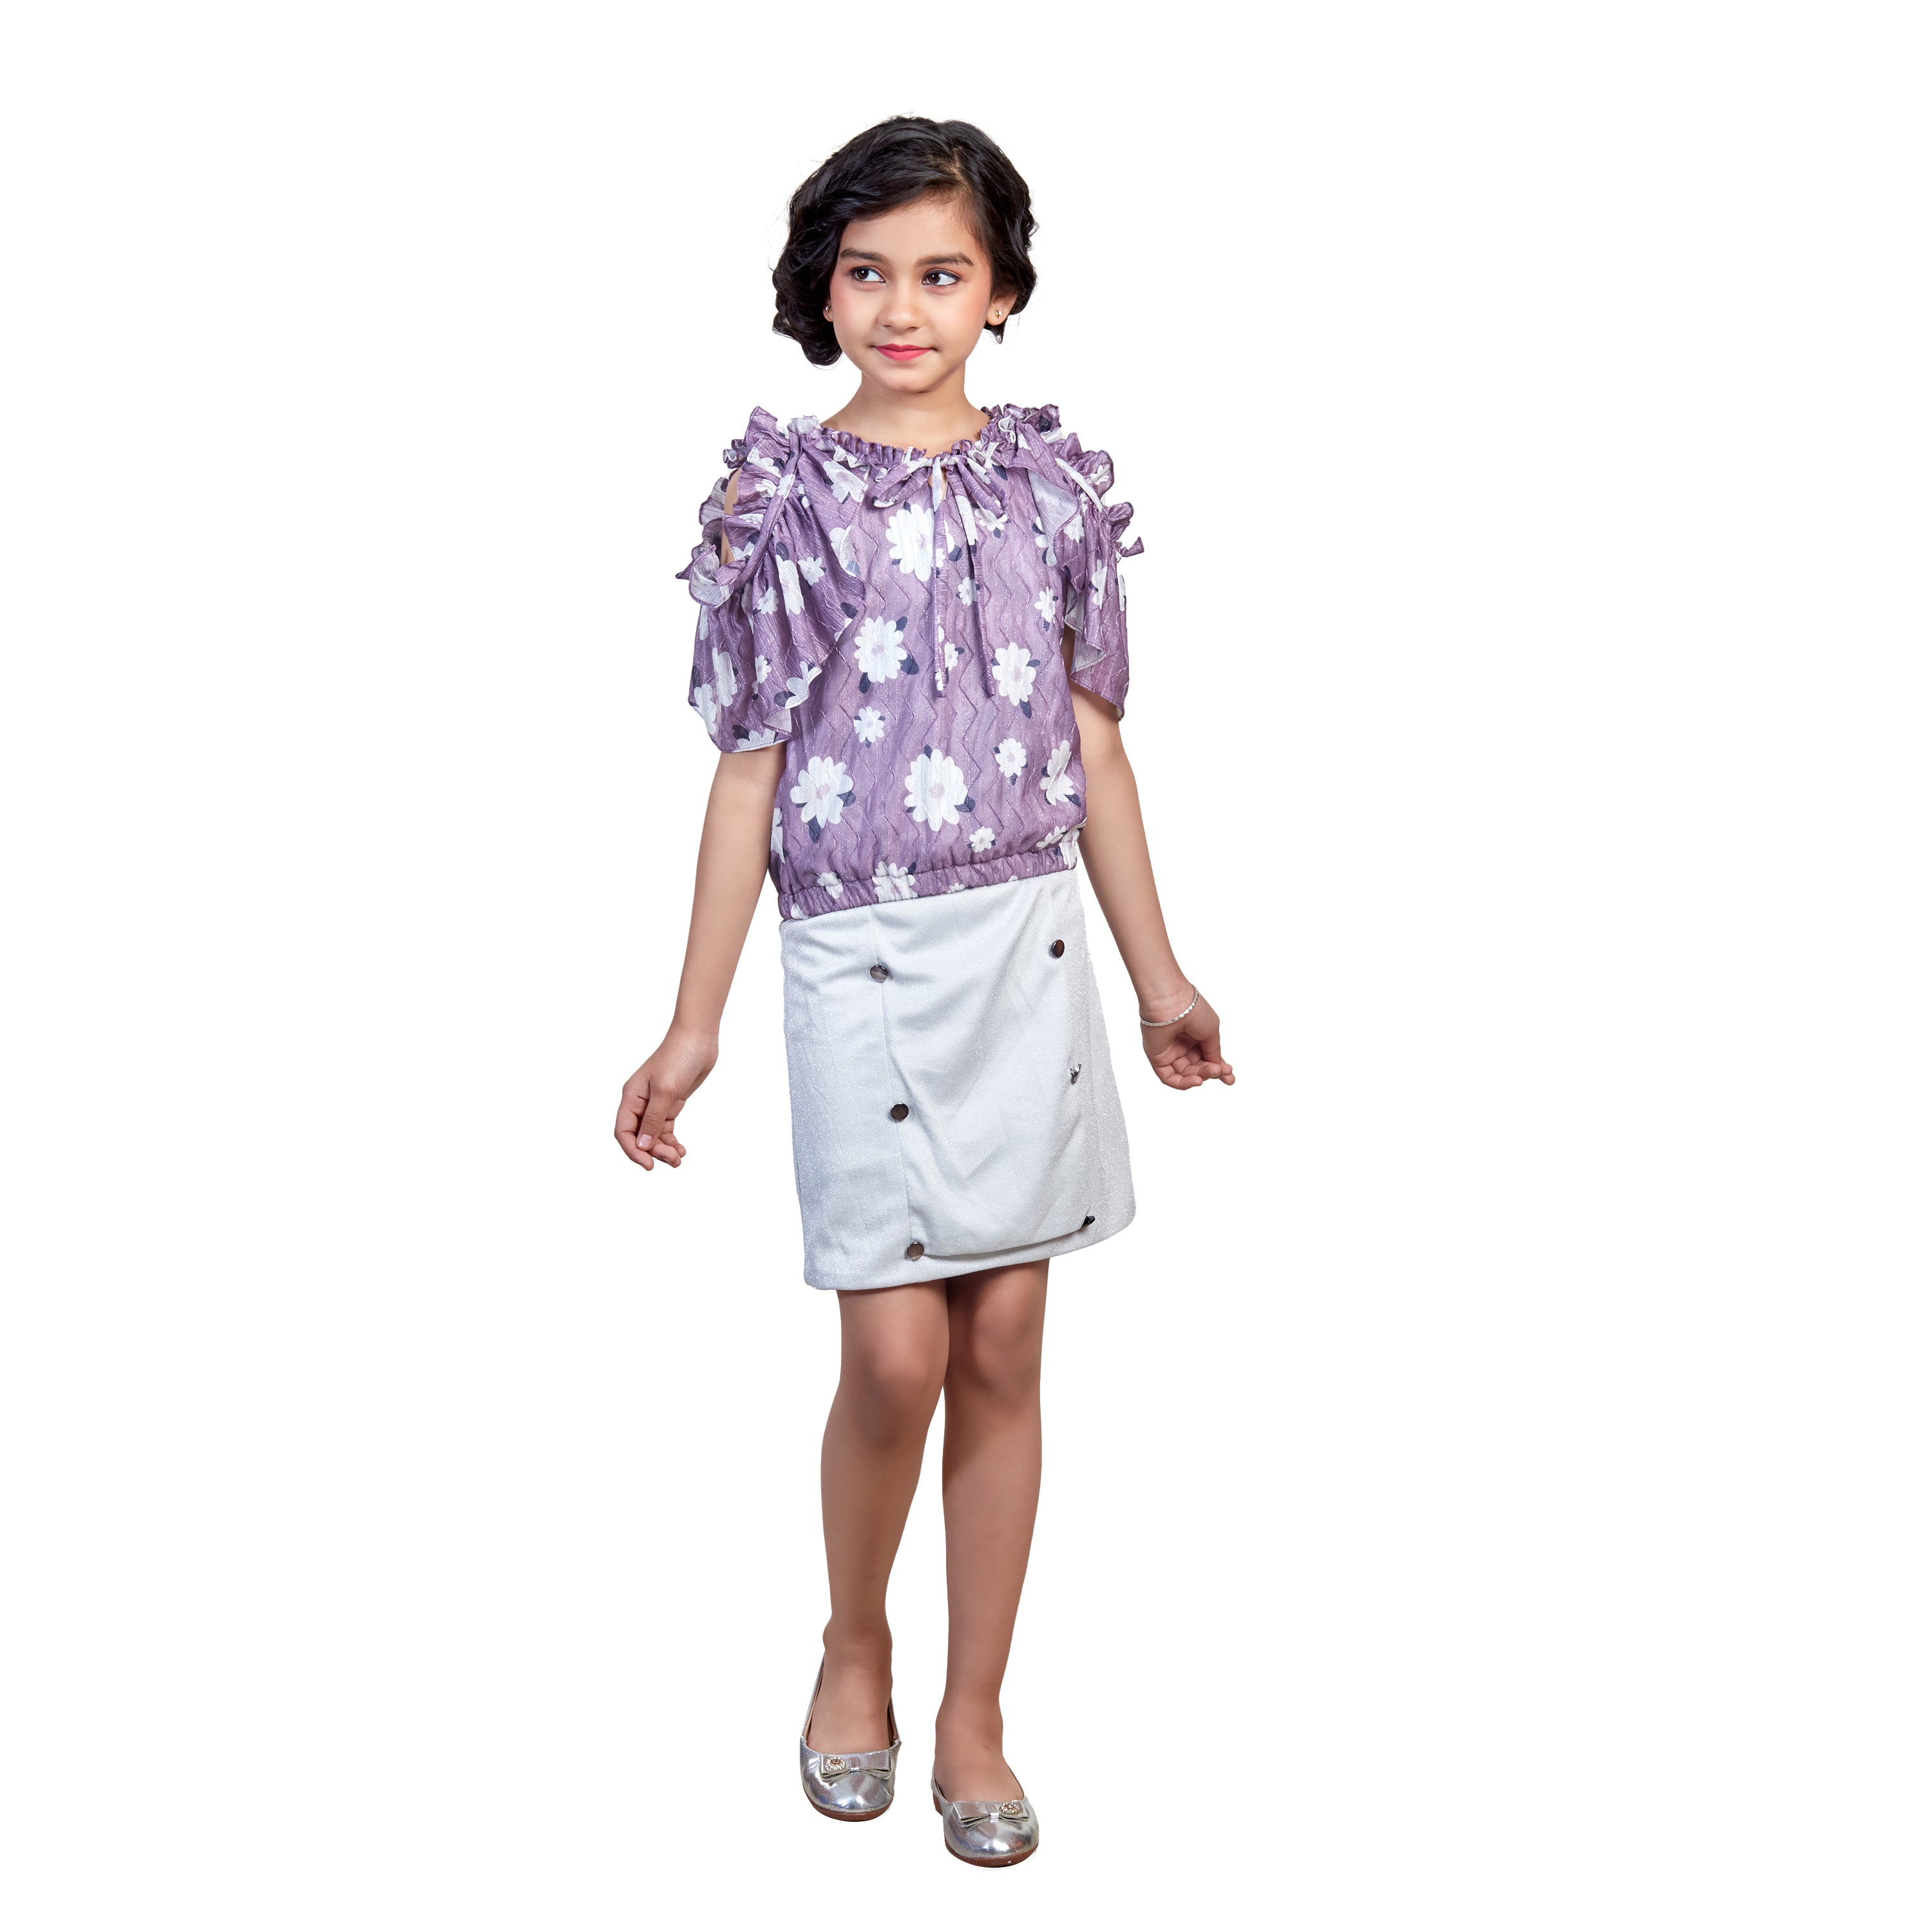 Floral Top With Skirt - Purple